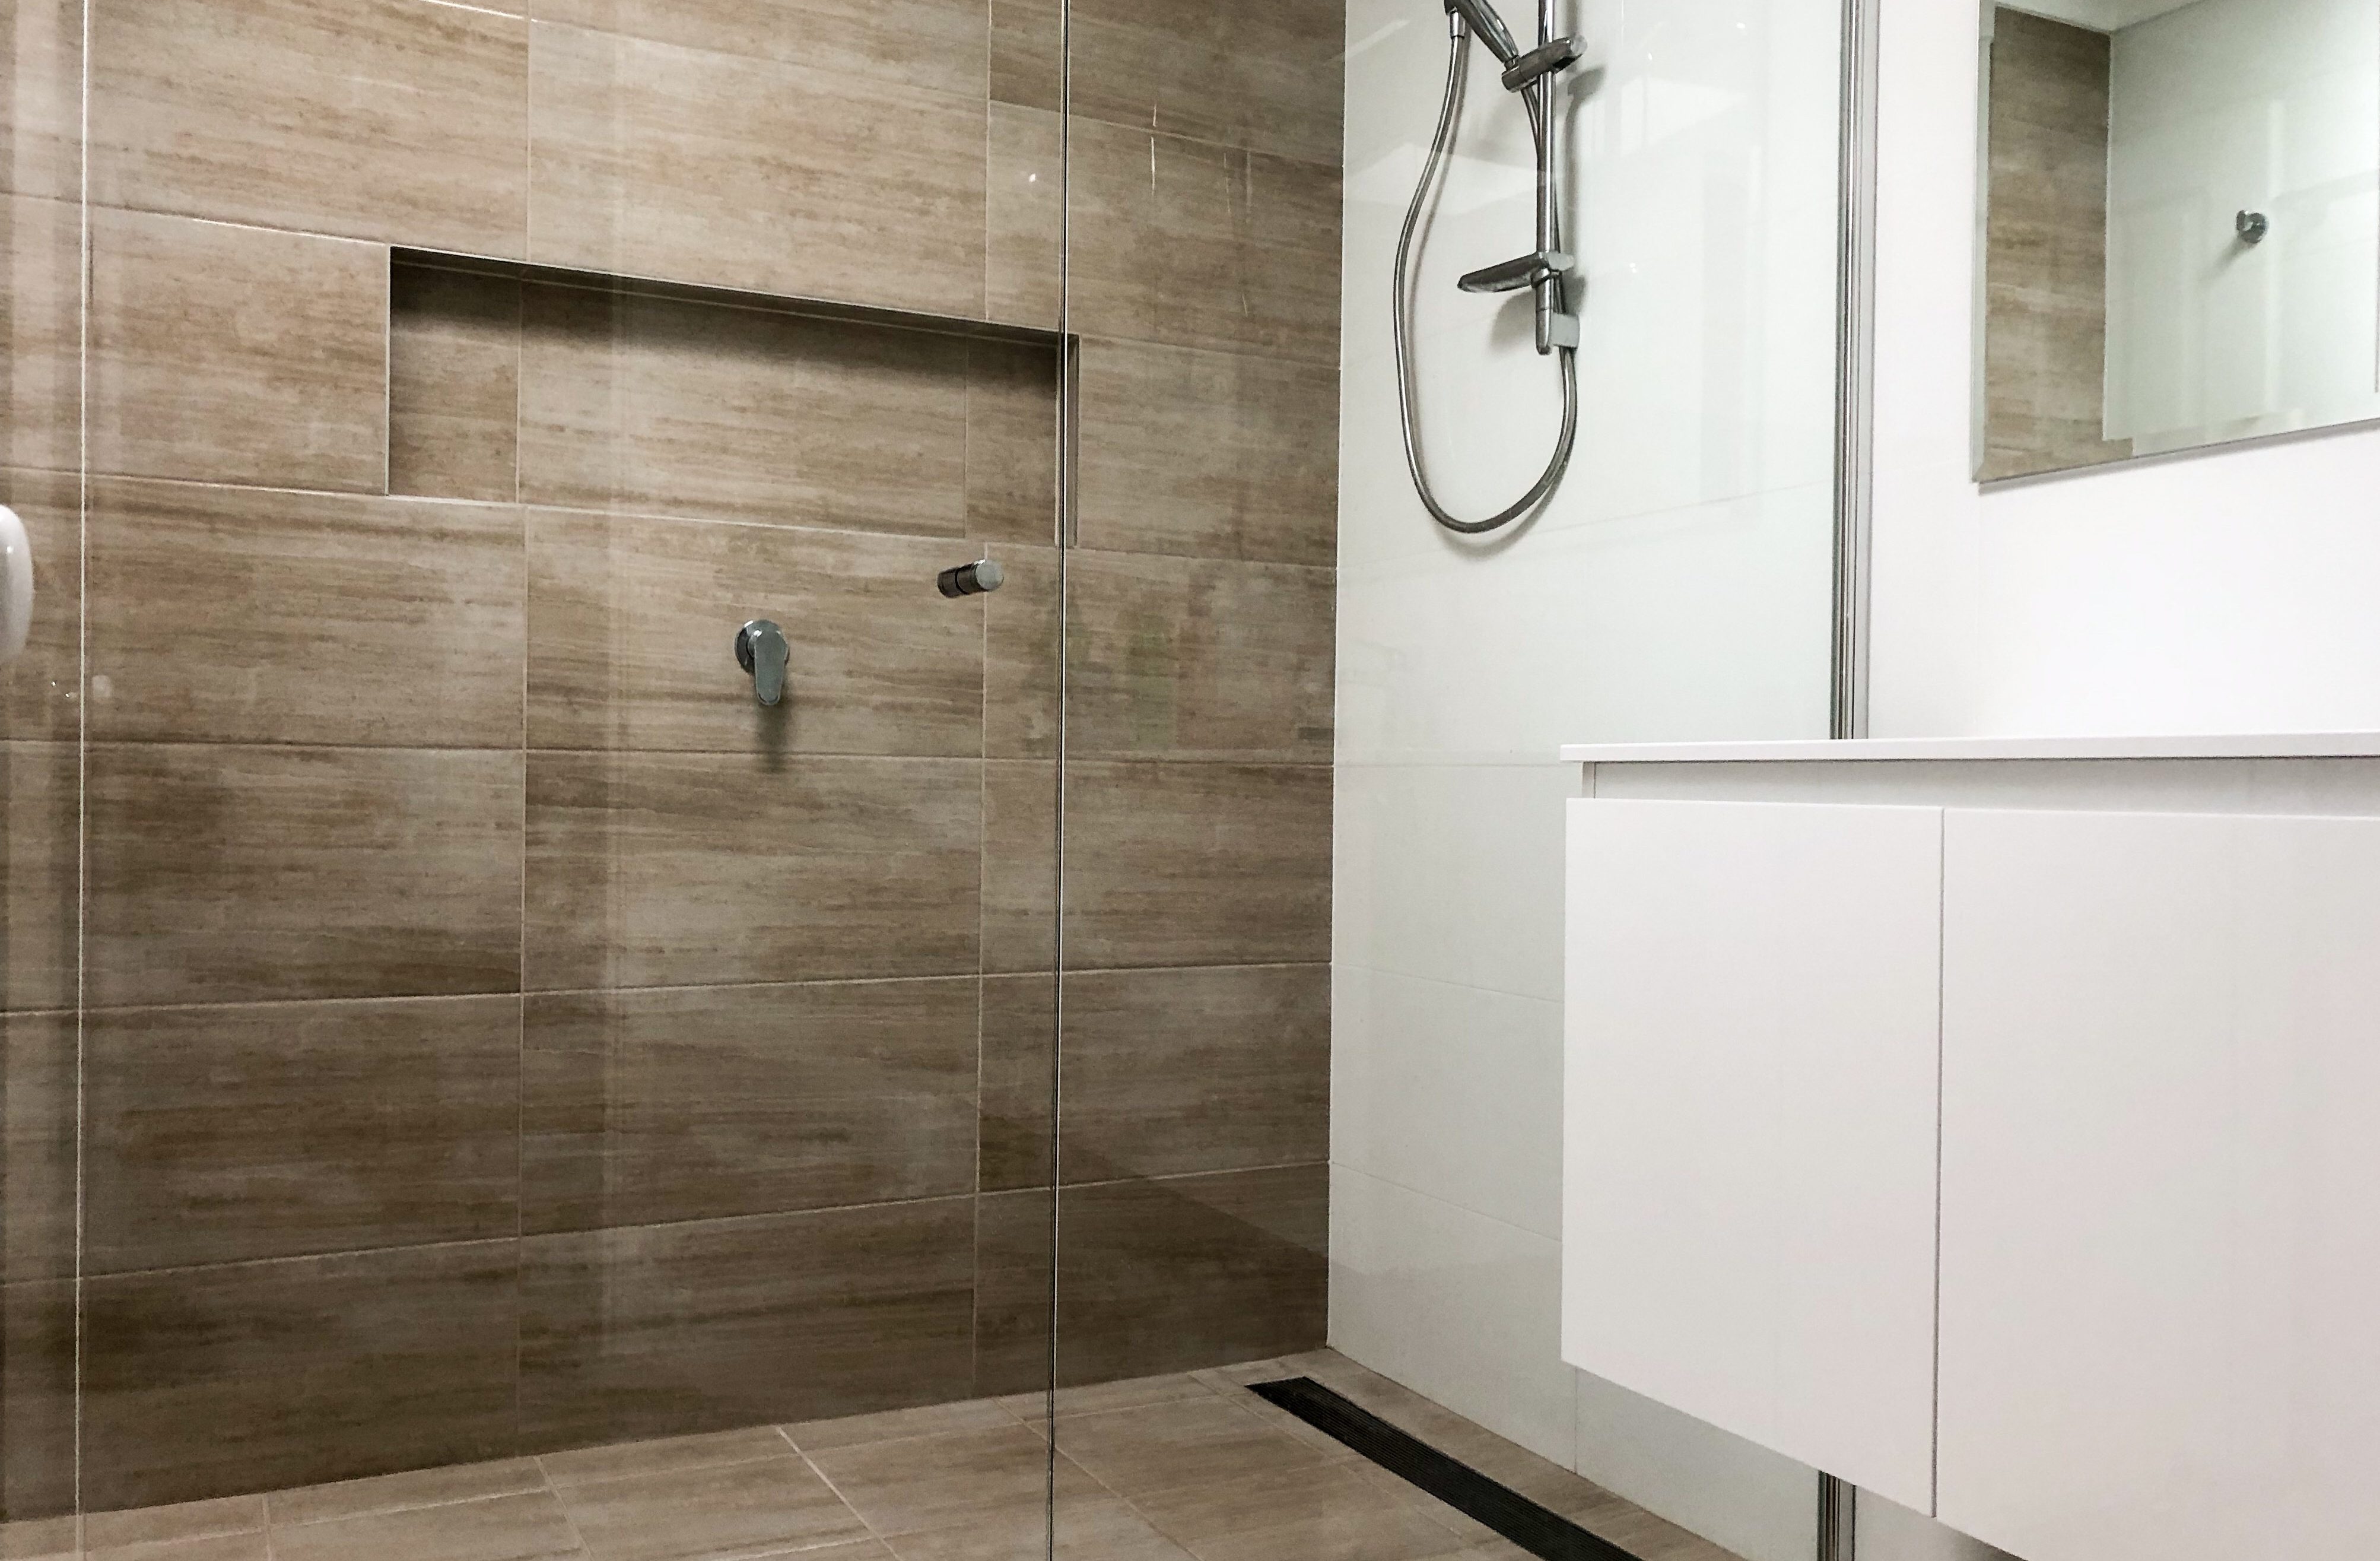 Beautiful shower recess with timber tile feature wall, shower niche, linear shower grate and semi-frameless shower screen - bathroom renovation by Master Bathrooms & Kitchens.